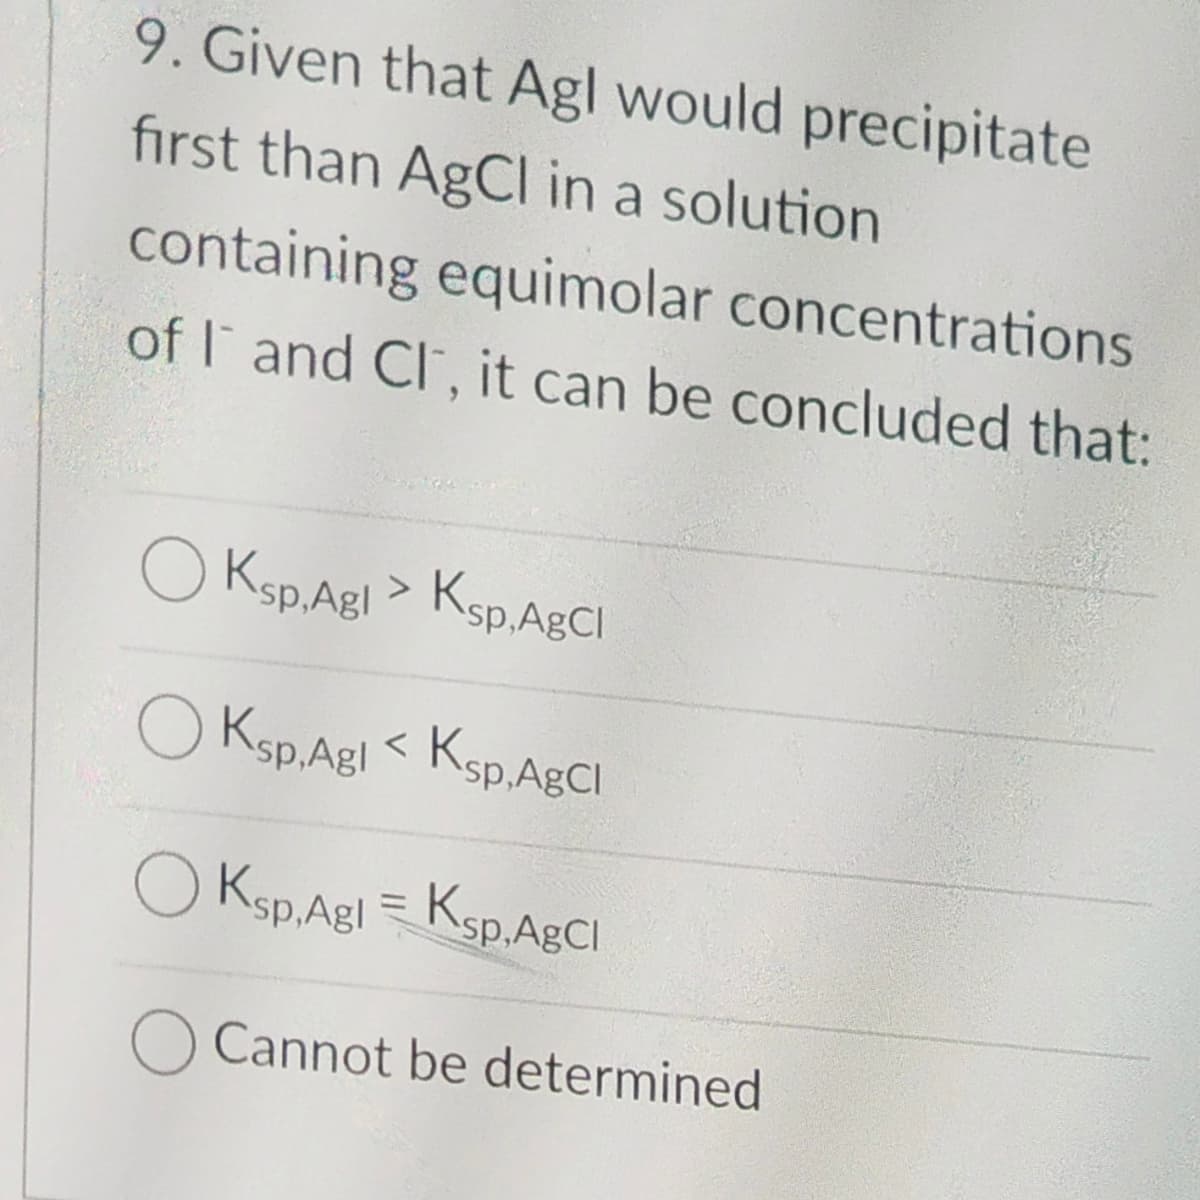 9. Given that Agl would precipitate
first than AgCl in a solution
containing equimolar concentrations
of I and Cl, it can be concluded that:
OKsp.Agl > Ksp. AgCl
OKsp.Agl<Ksp, AgCl
Ksp,Agl=Ksp,AgCl
O Cannot be determined